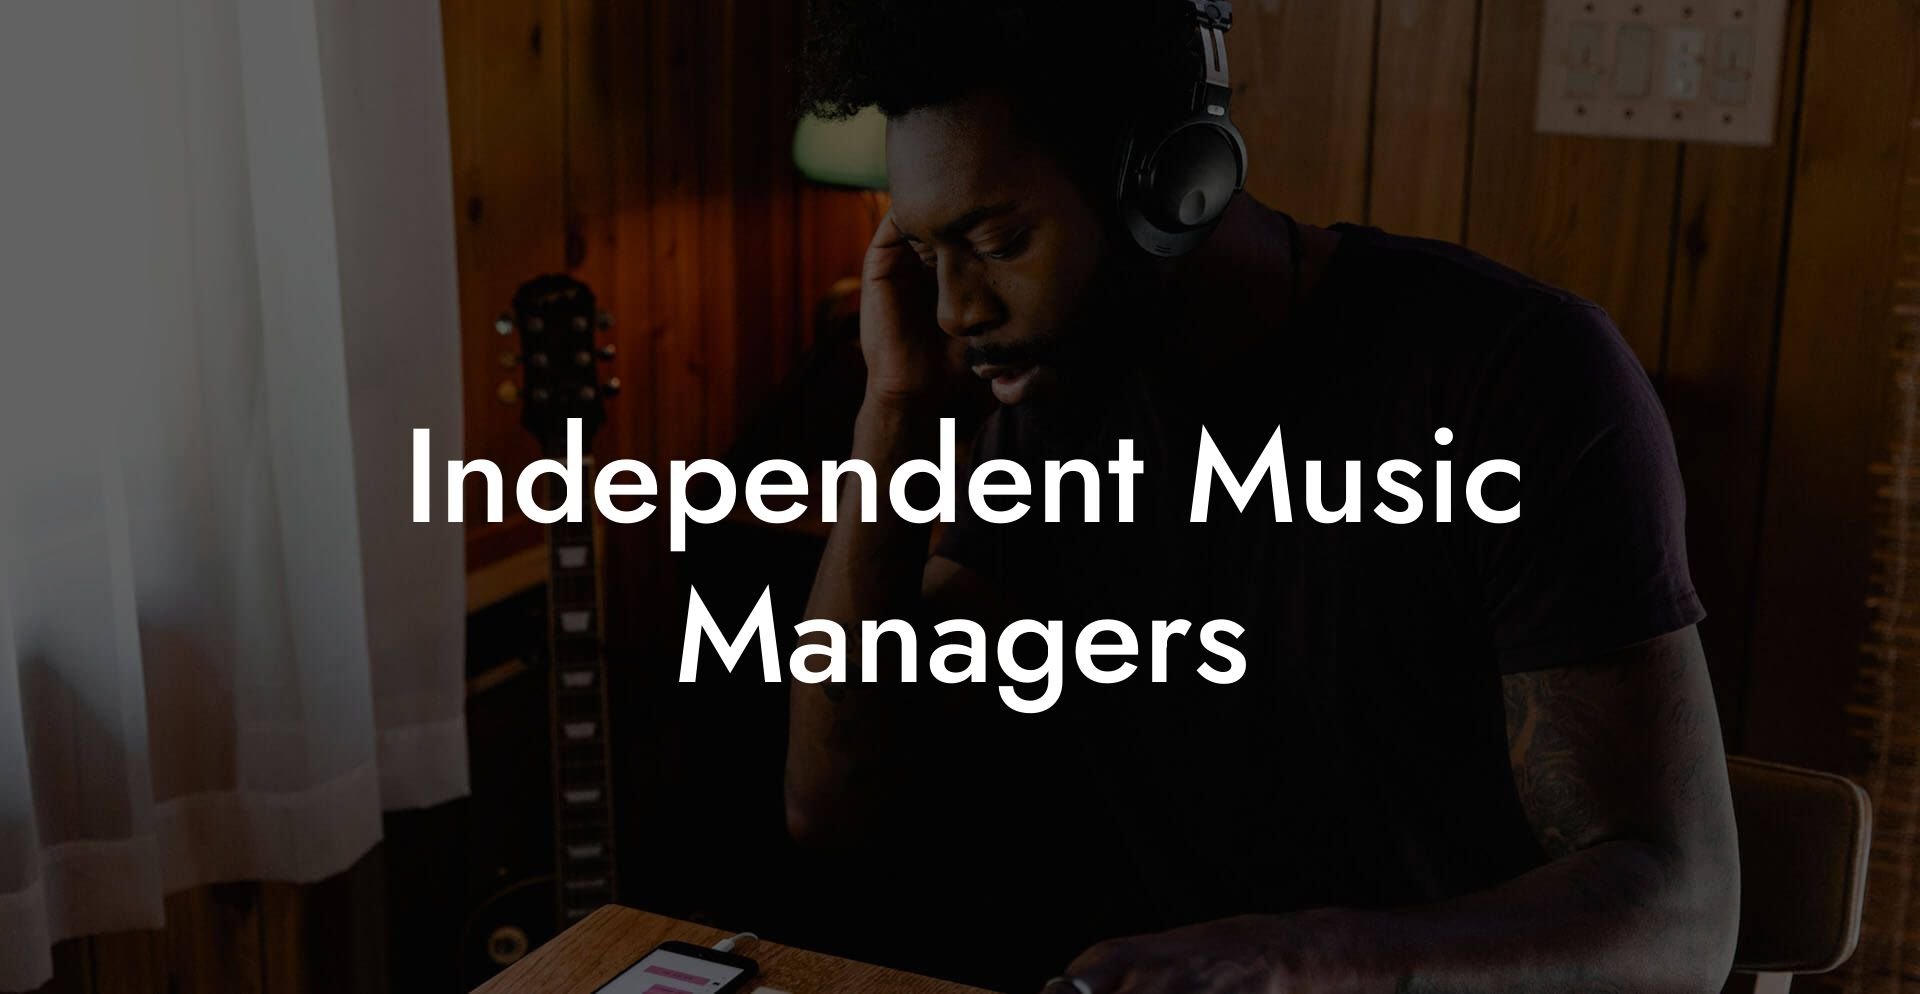 Independent Music Managers